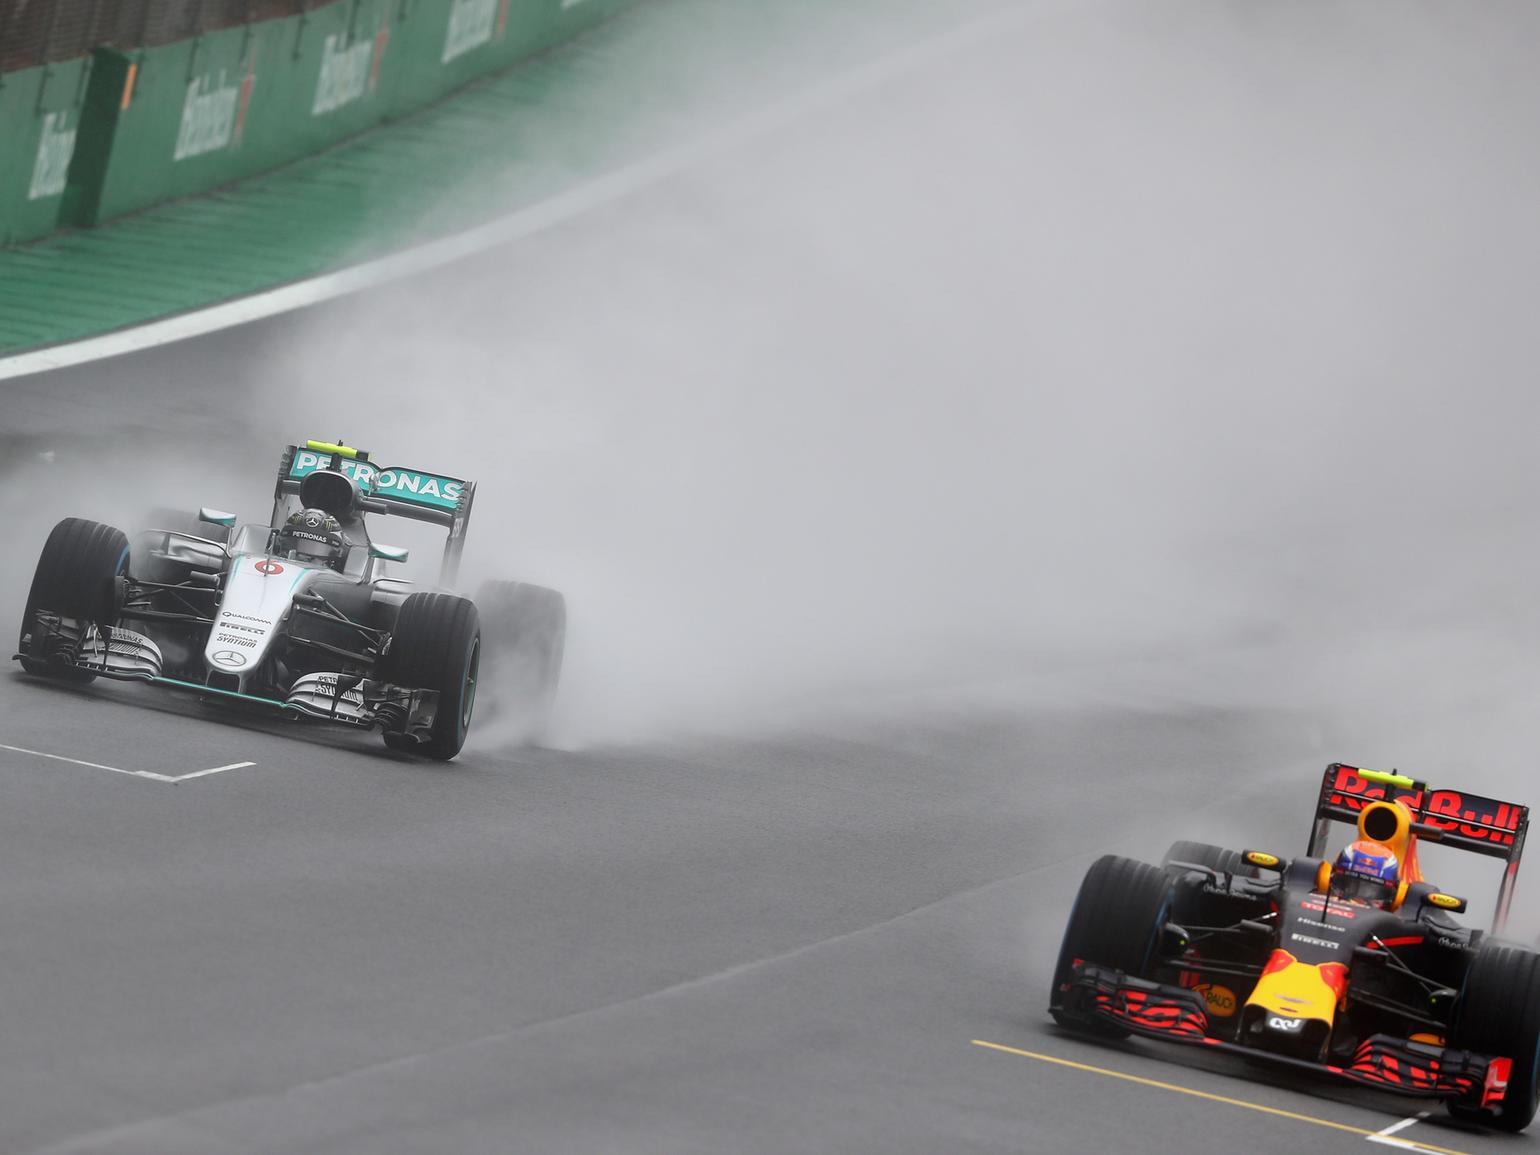 It could be his best race yet. Rain at Interlagos played into his hands as a tore through the field, remarkably kept his car out of the wall after a half spin and claimed third spot.